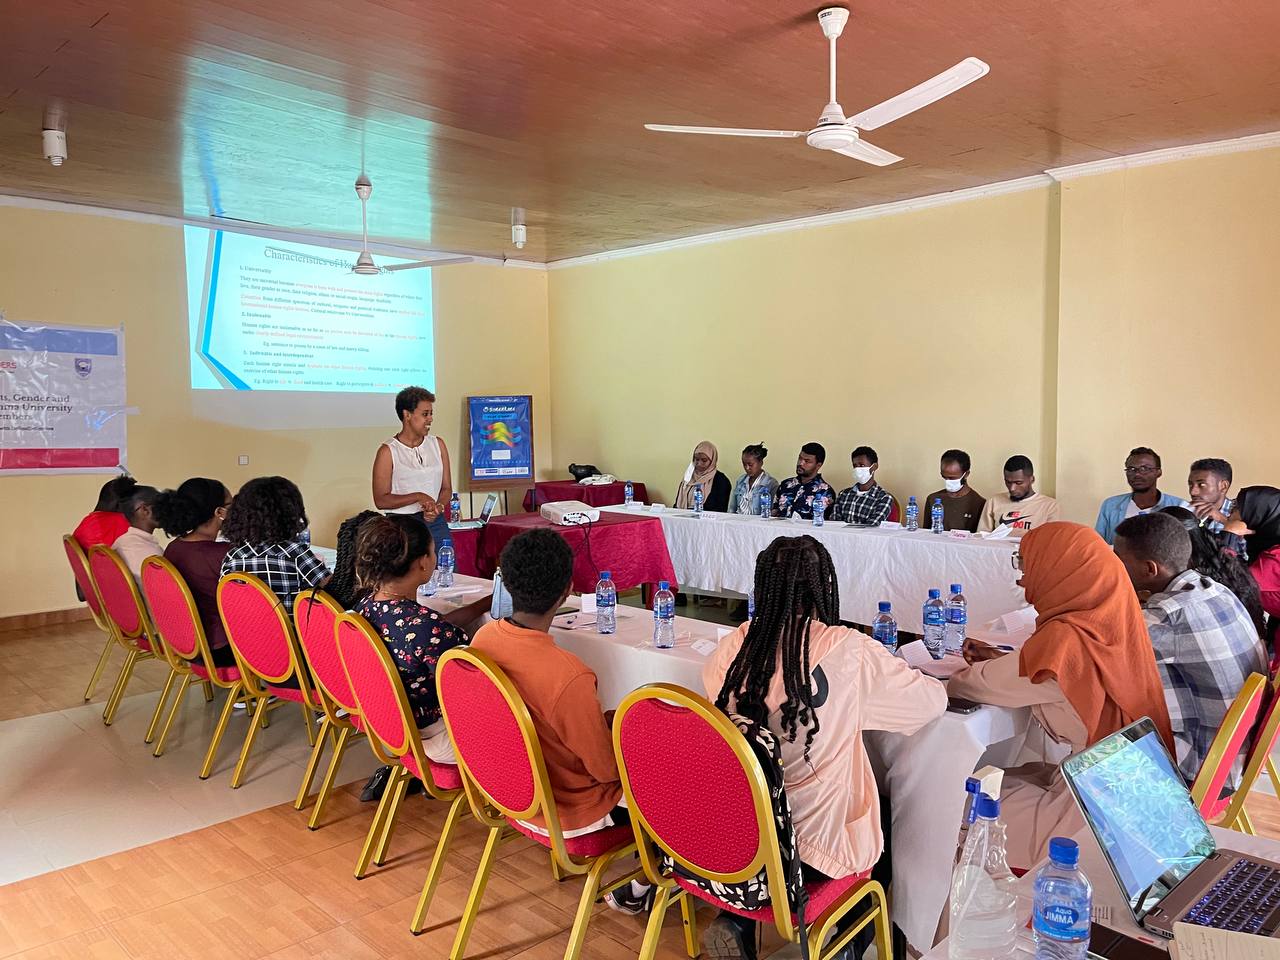 Training on Basic Human Rights, Gender and Human Rights Advocacy for Jimma University Human Rights Club Members. the training is organized in collaboration with DefendDefenders.